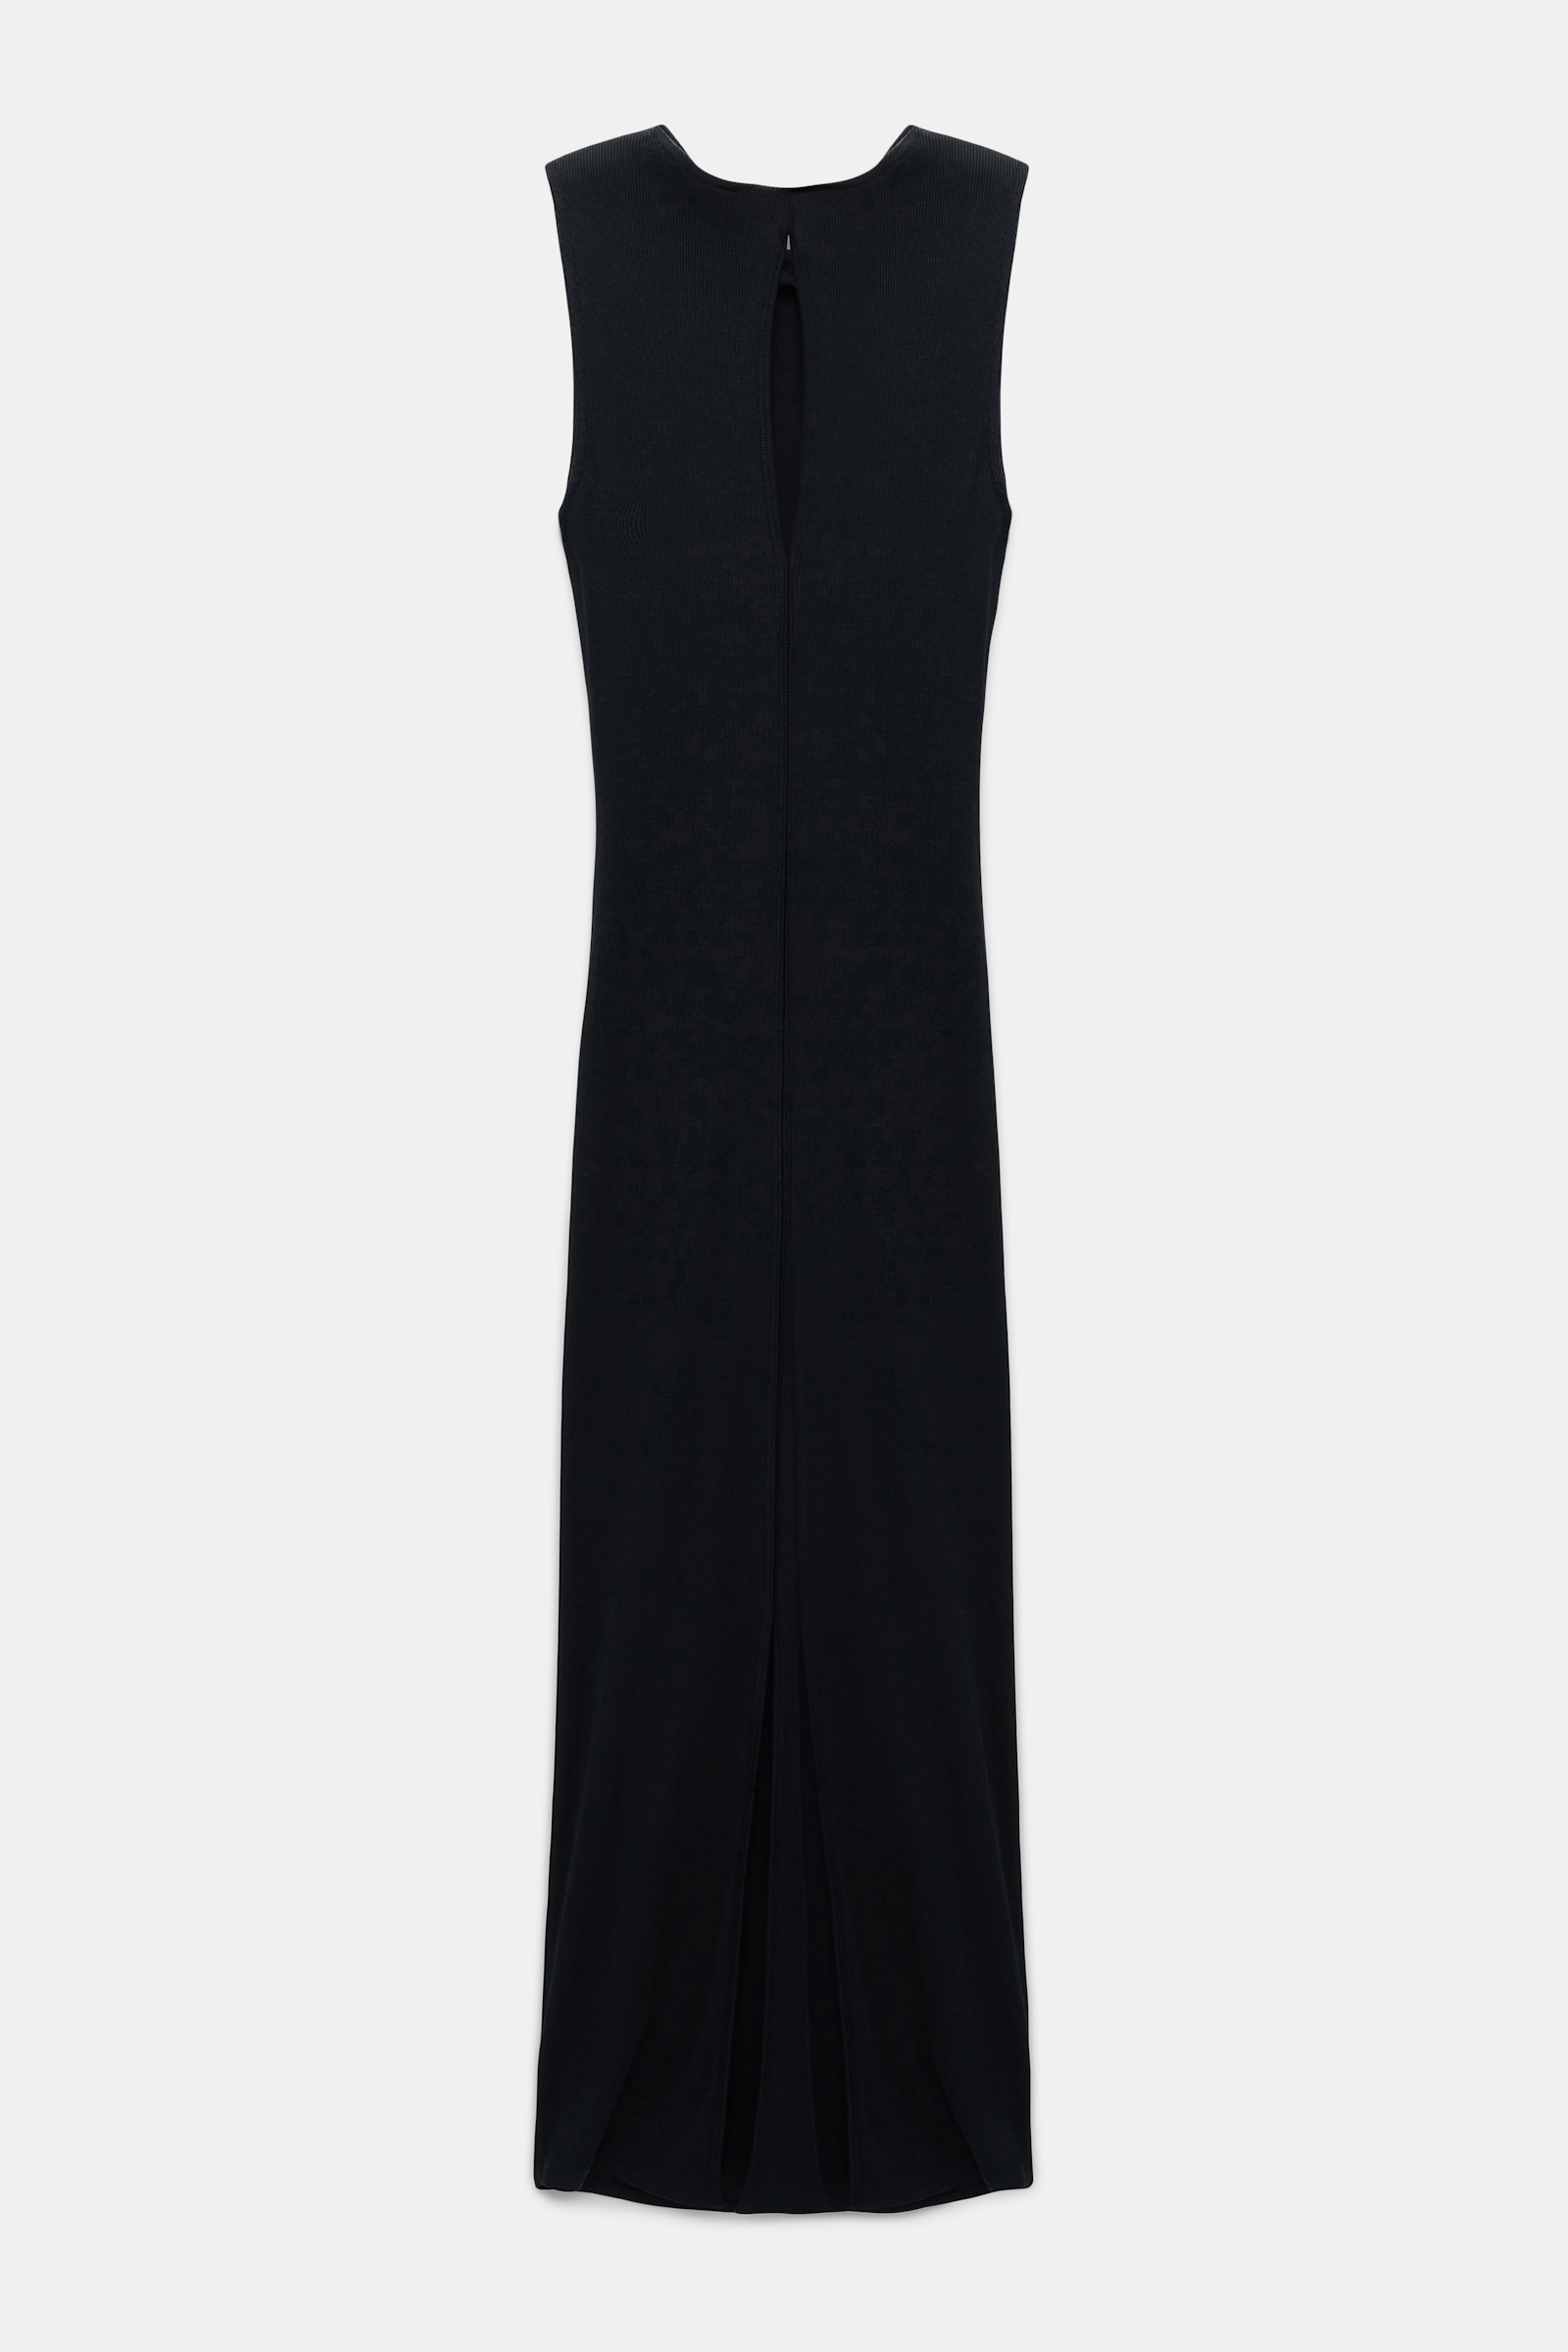 Dorothee Schumacher Ribbed cotton jersey tube dress pure black